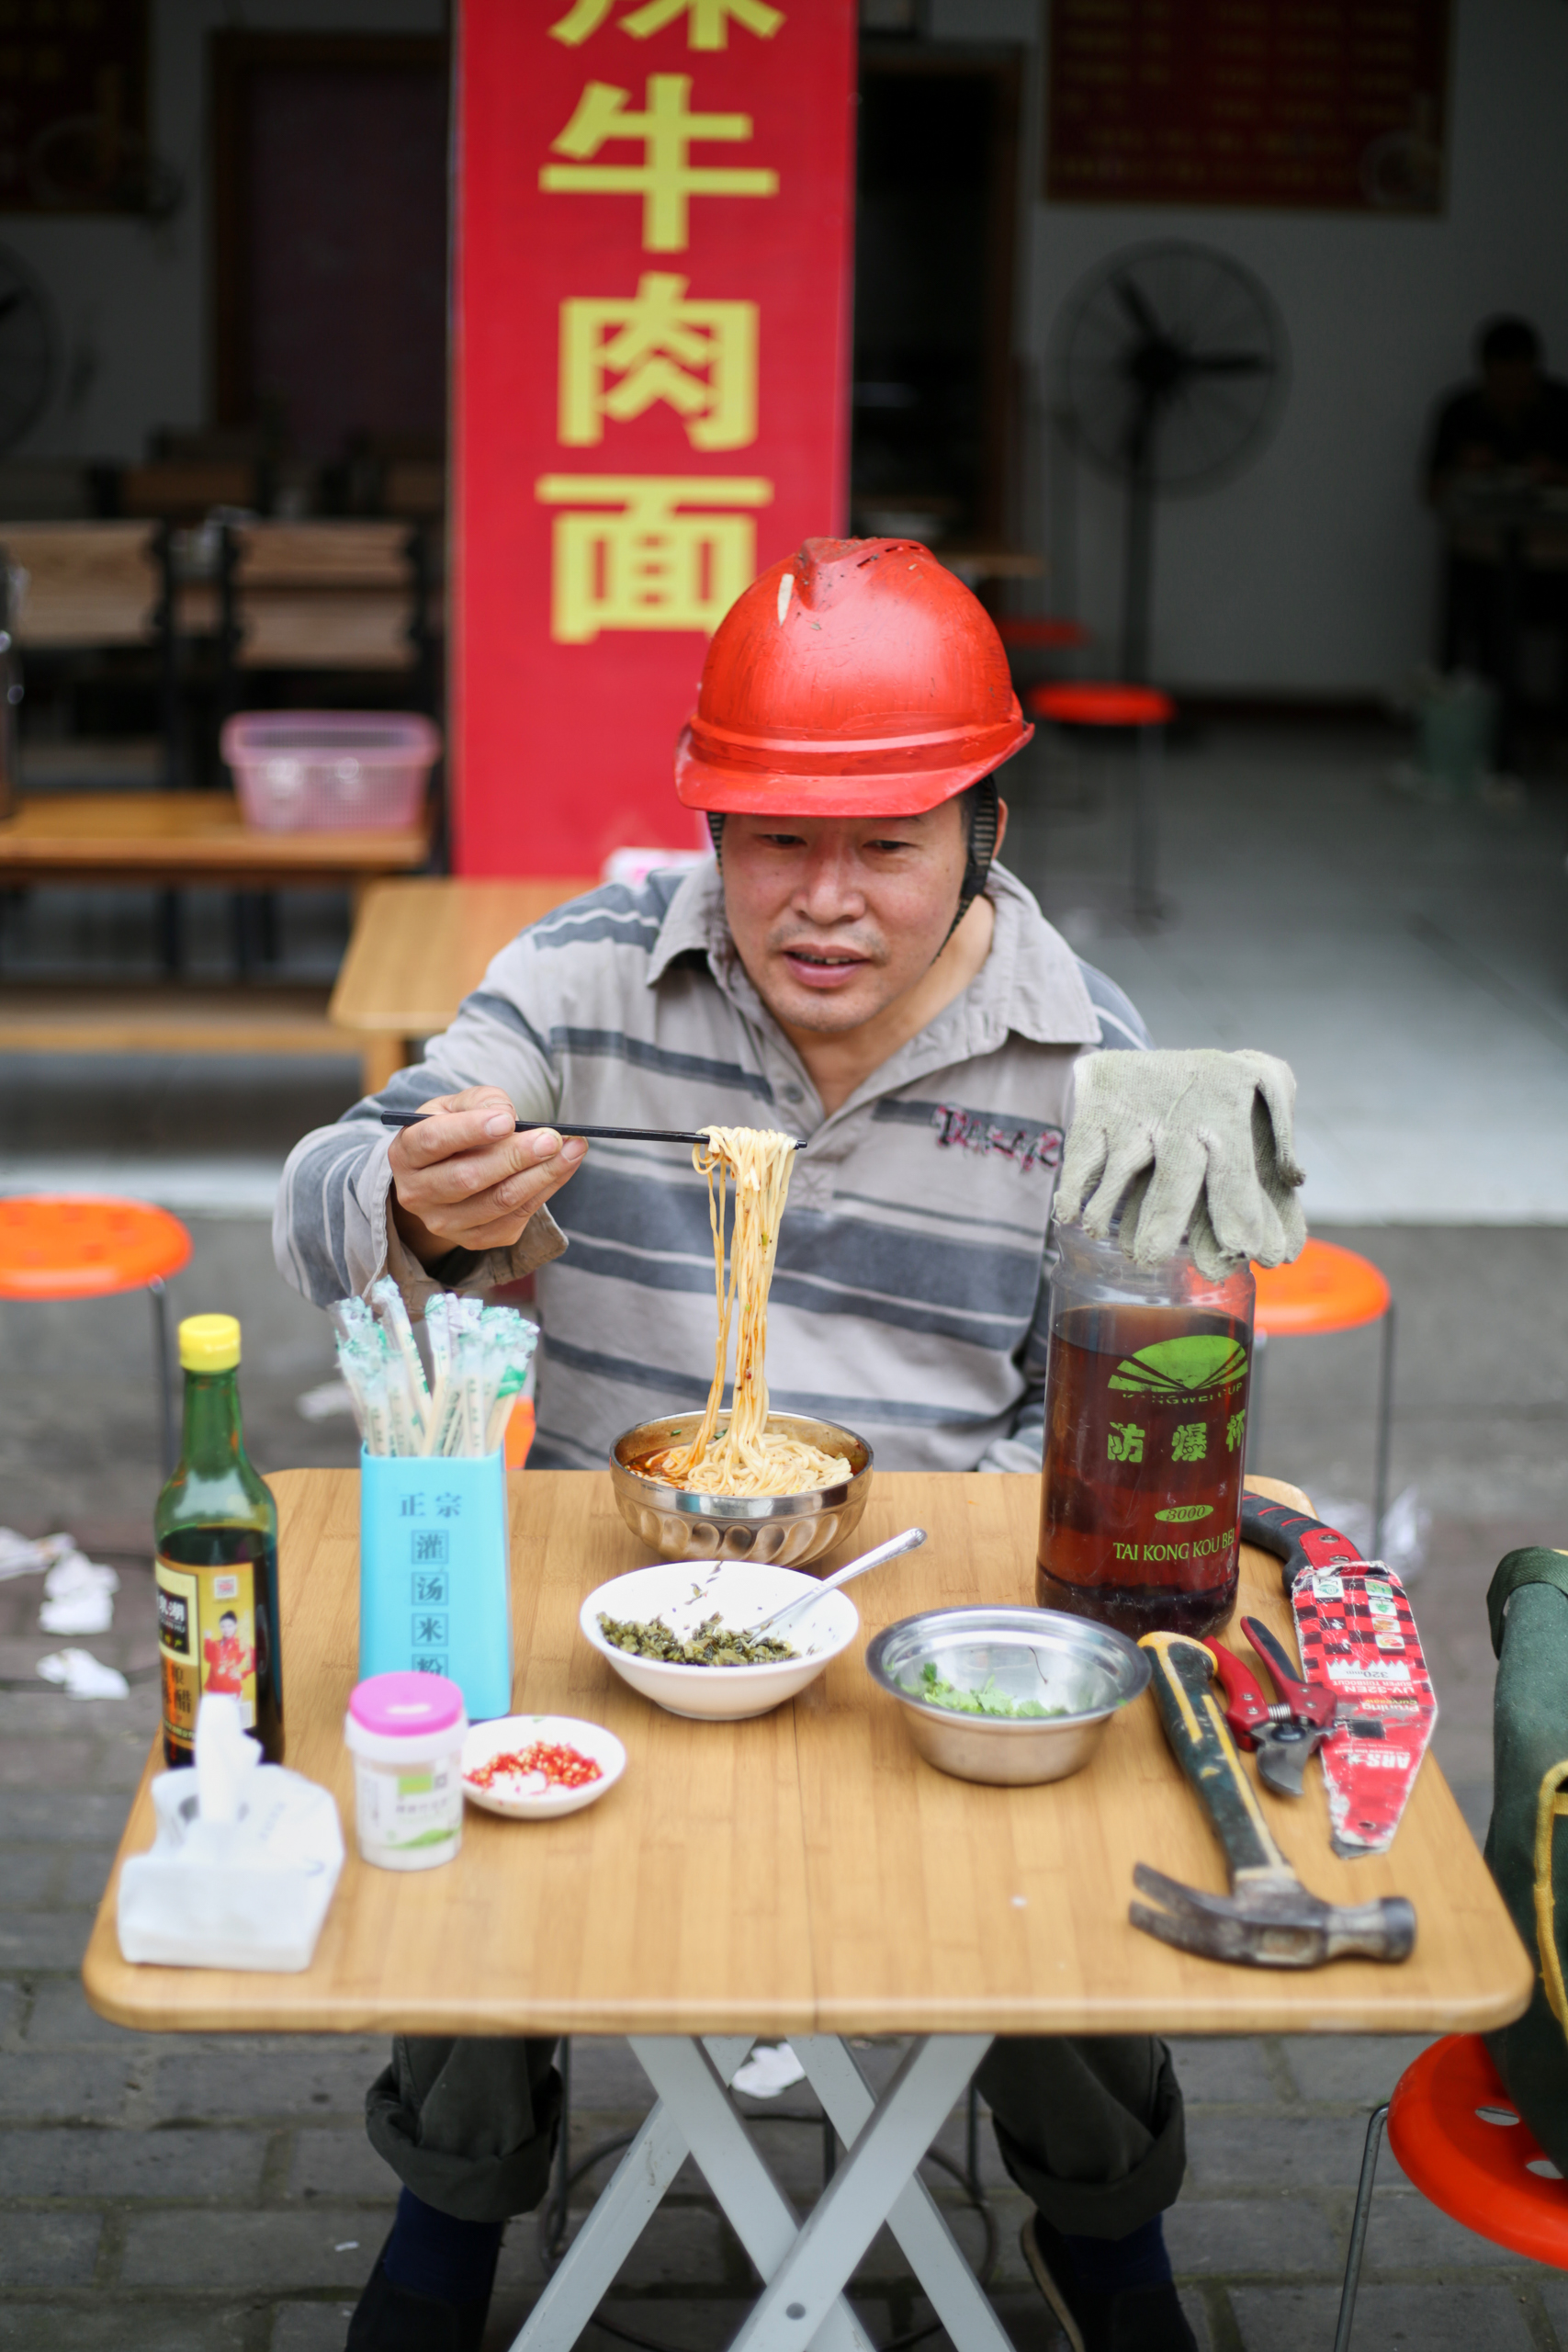 Man wearing a hardhat eating noodles with chopsticks